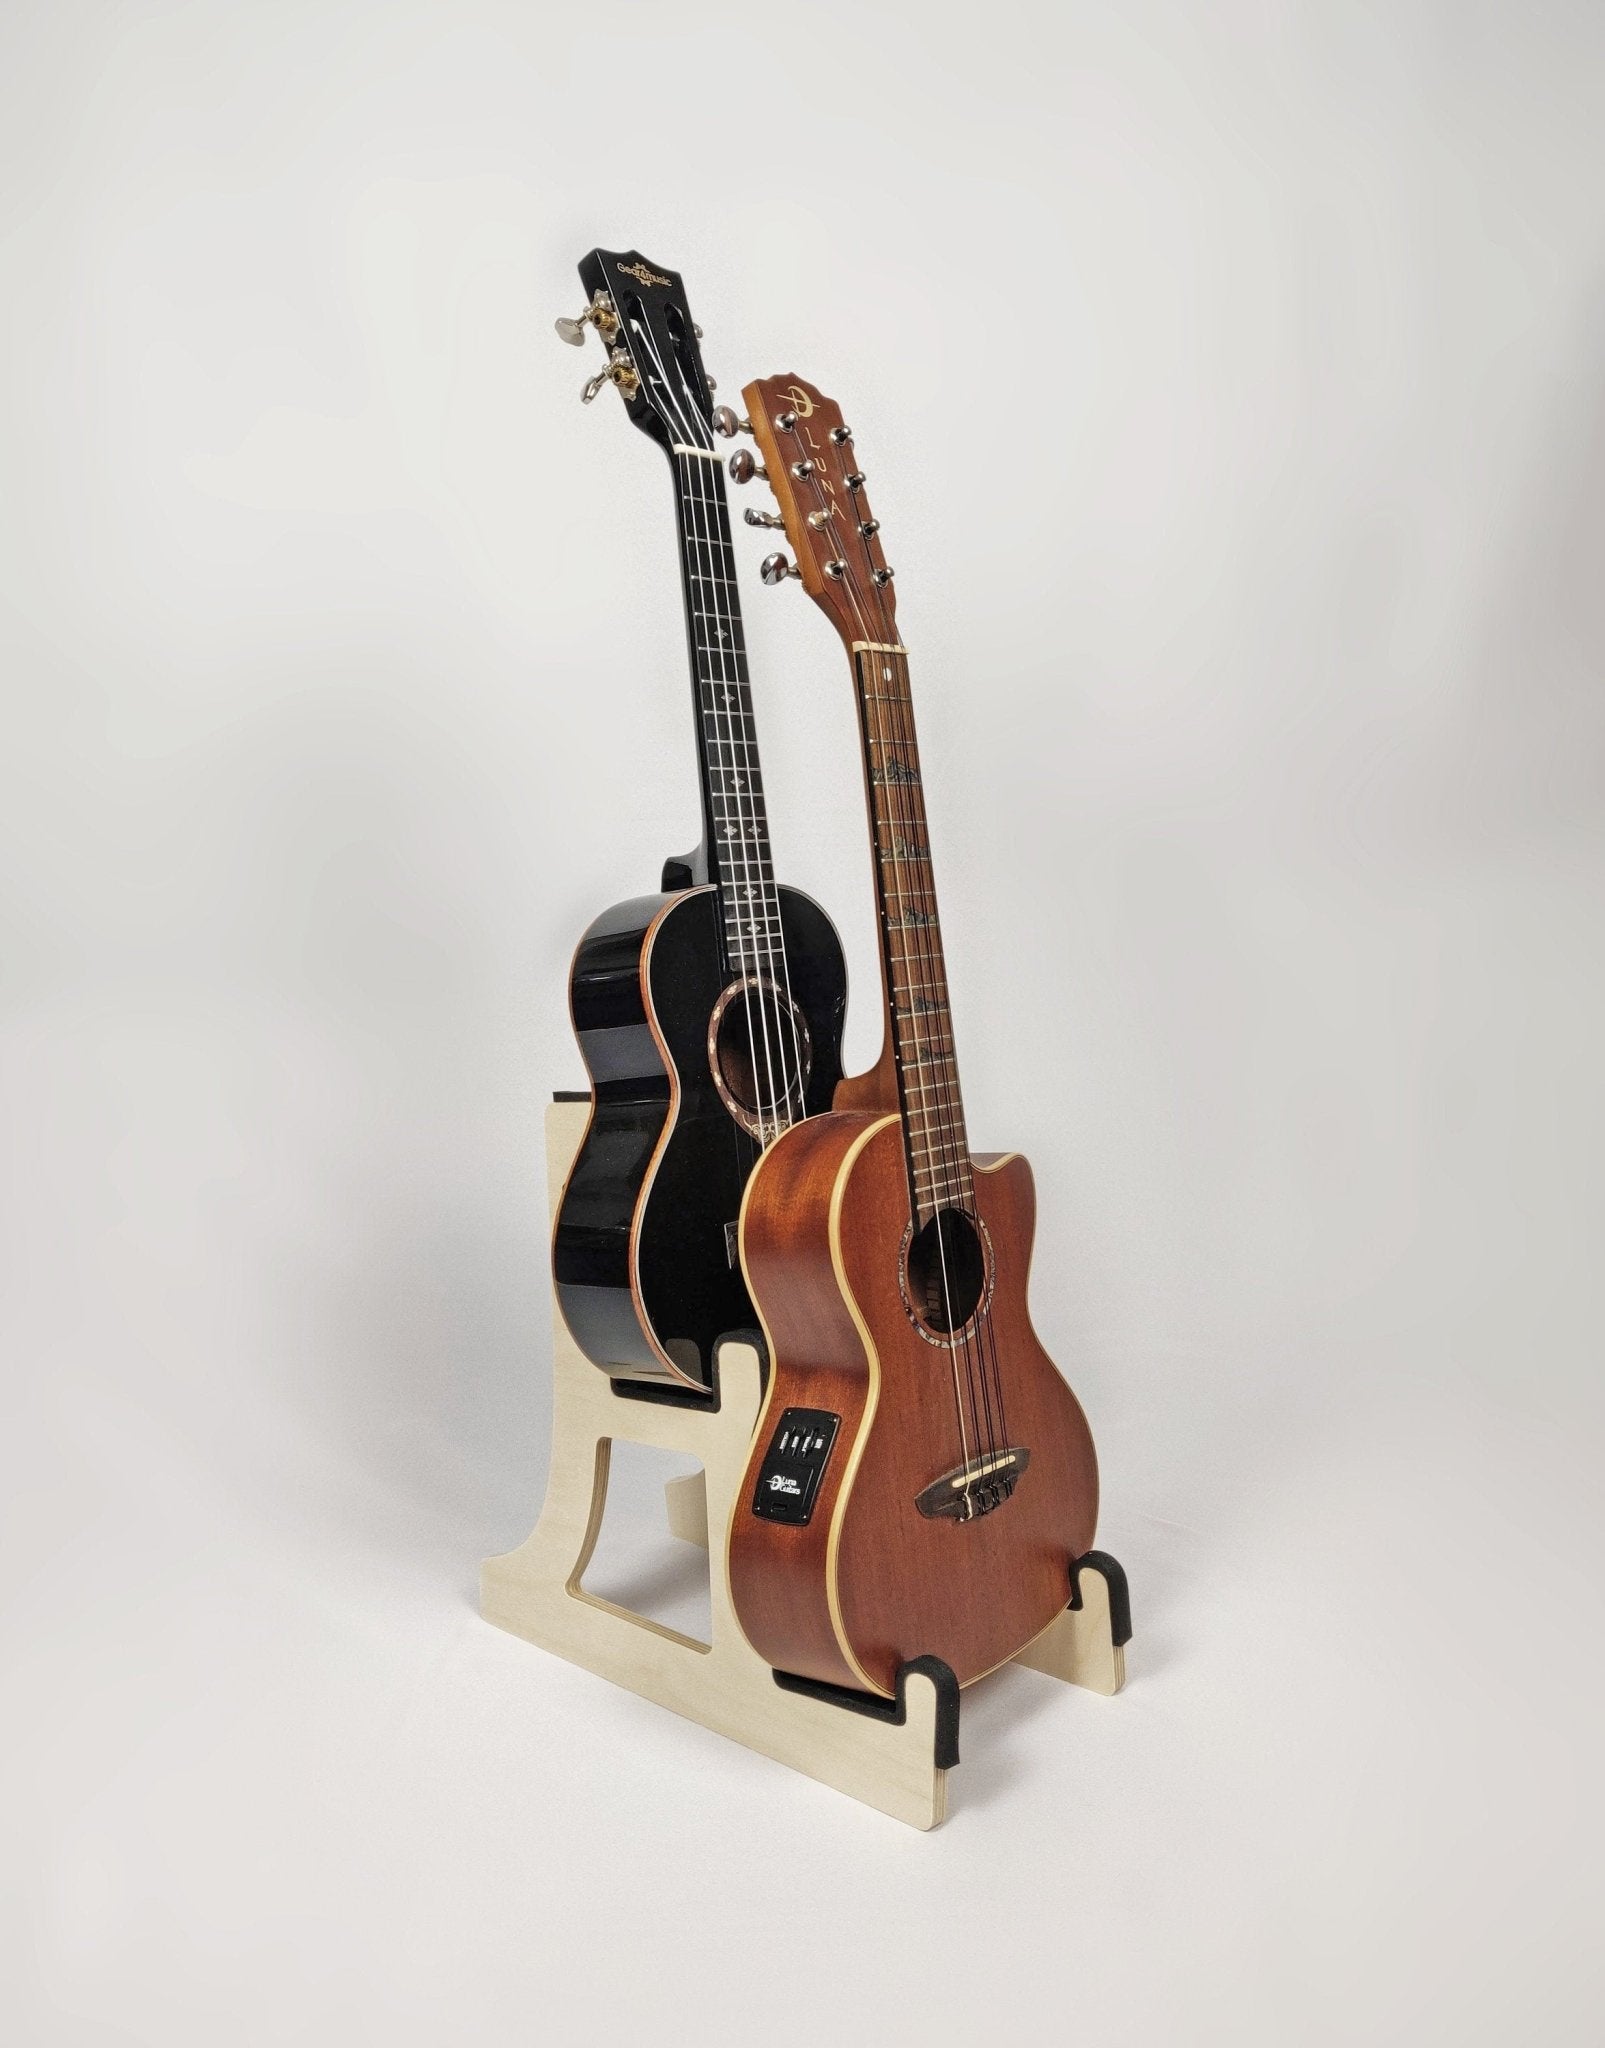 Double Decker Ukulele Stand, Customisable for Two/2 Ukes, Mandolin, Violin and more, Made In Ireland - Caulfield Composites Standard Natural Birch